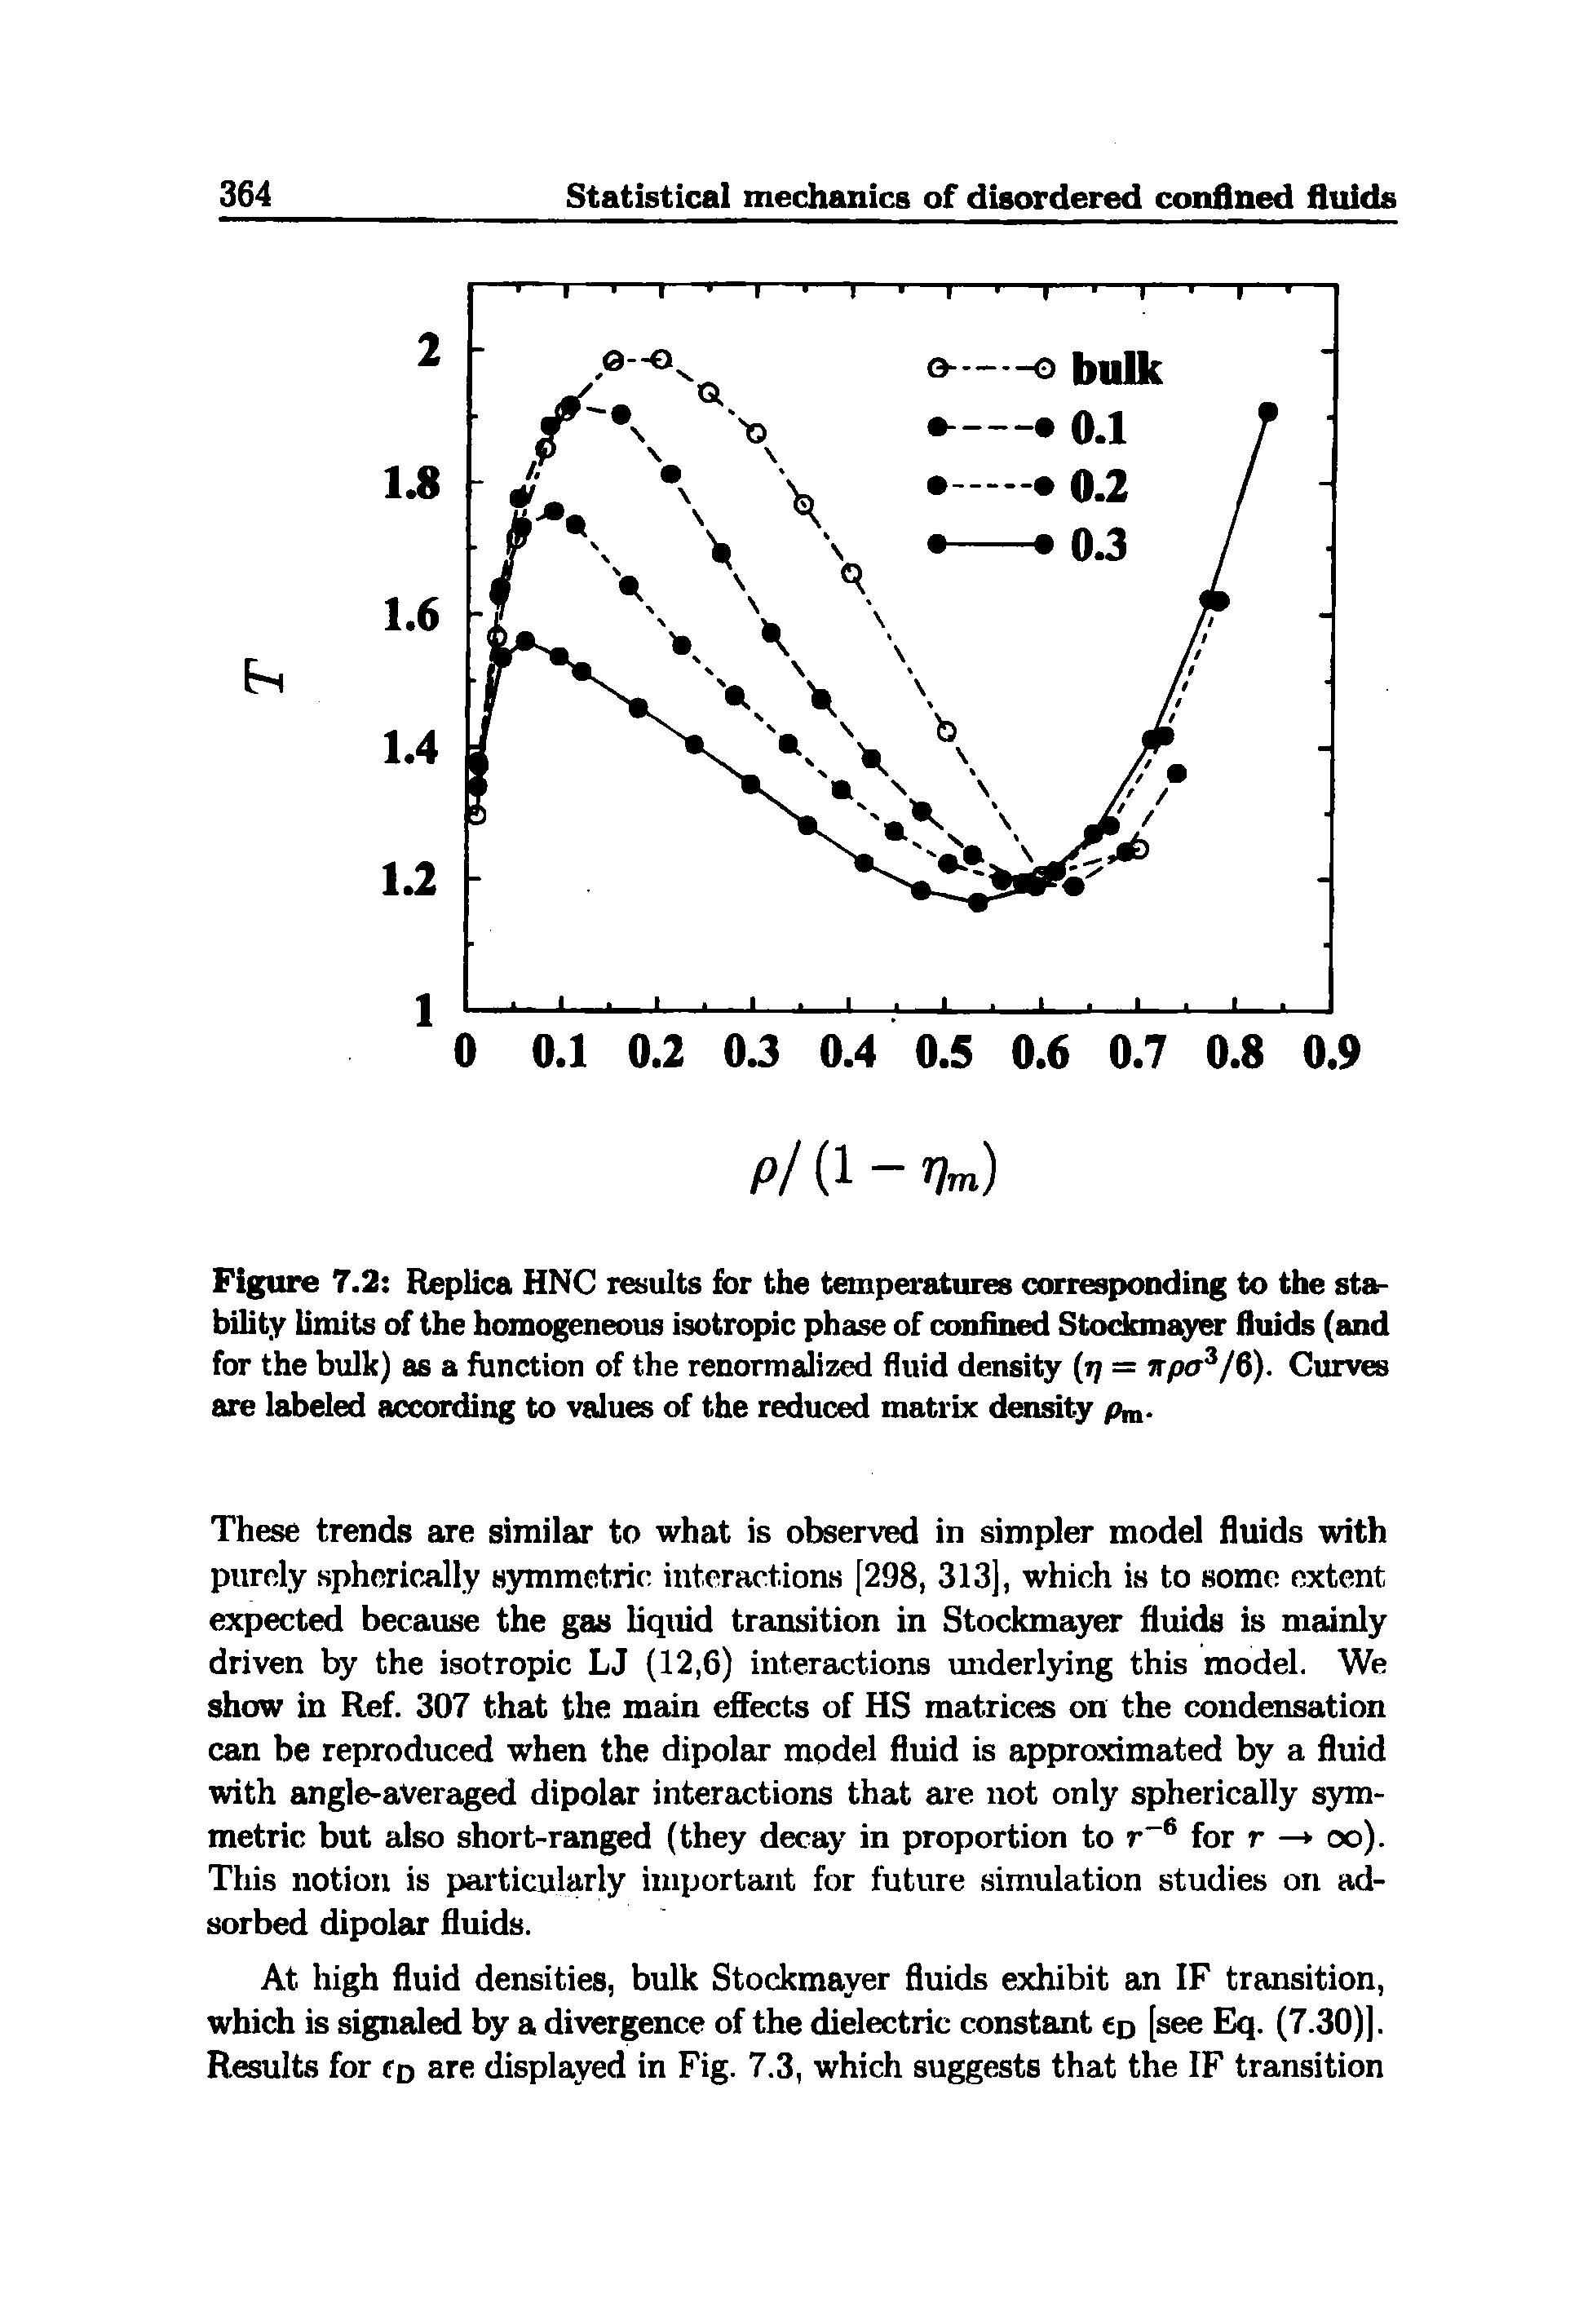 Figure 7.2 Replica HNC results for the temperatures corresponding to the stability limits of the homogeneous isotropic phase of confined Stodonayer fluids (and for the bulk) as a function of the renormalized fluid density (tf = npa /6). Curves are labeled according to values of the reduced matrix density pm-...